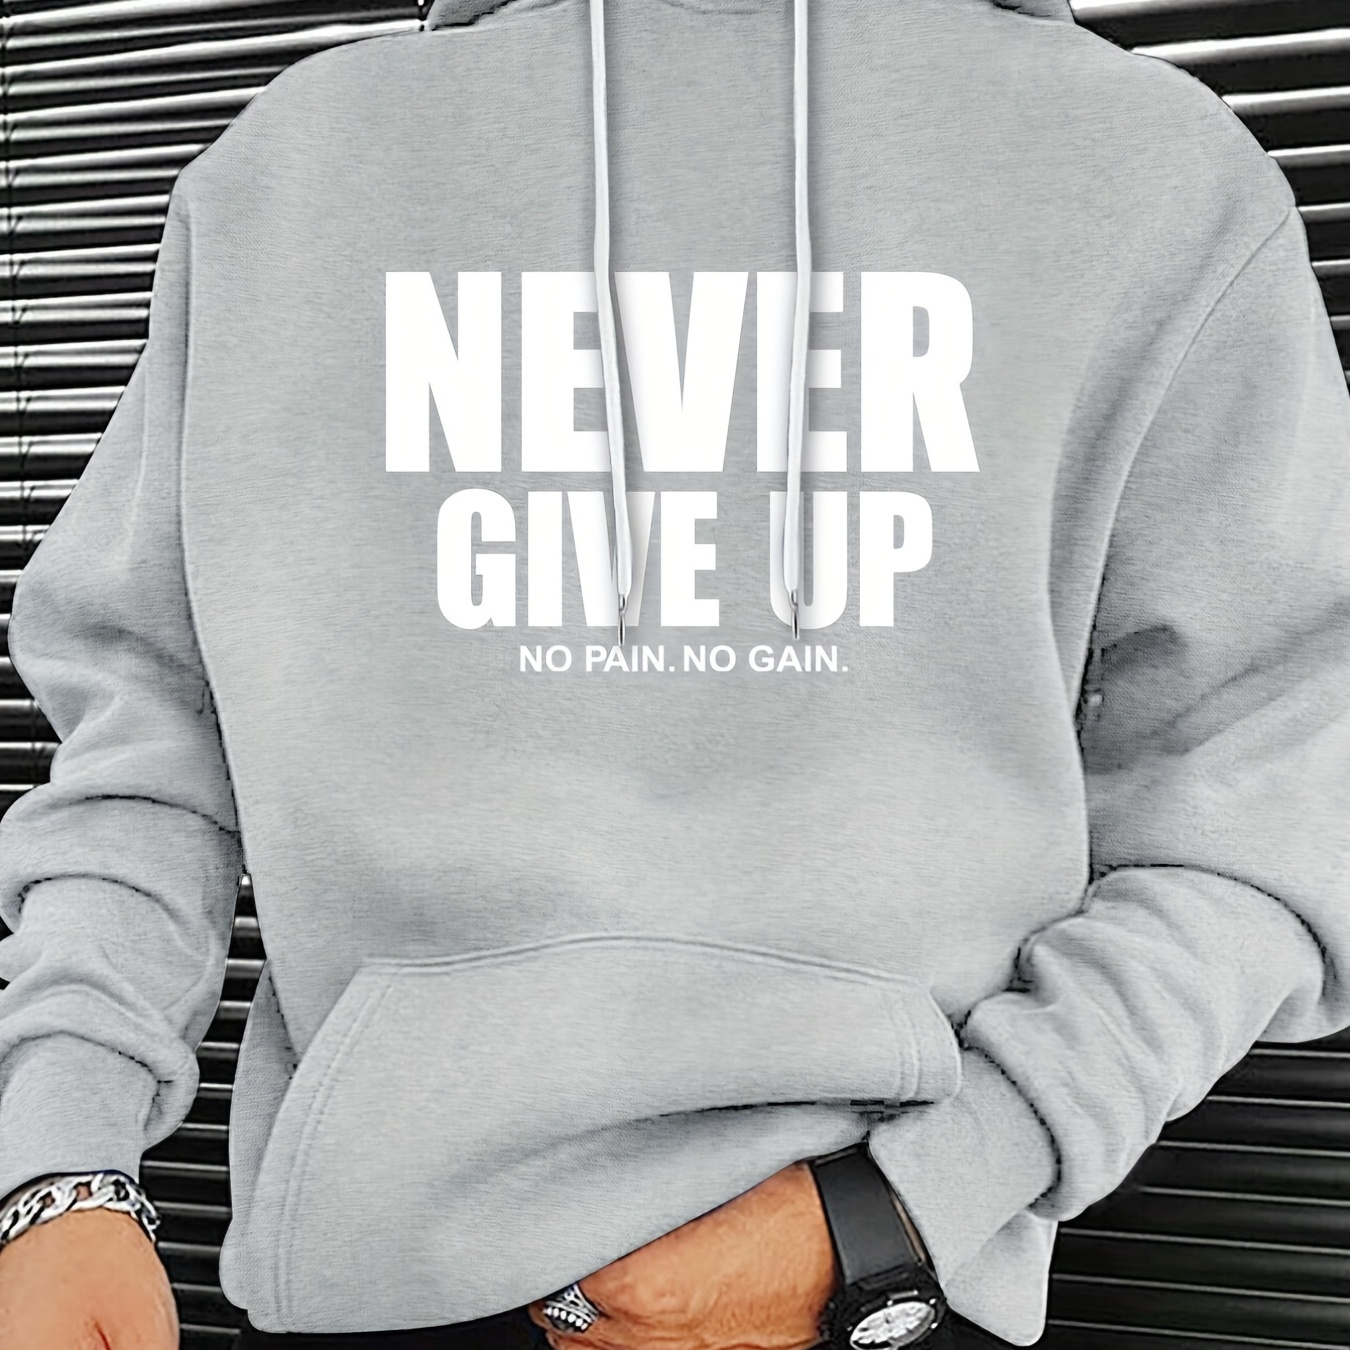 

Never Give Up Print Hoodie, Cool Hoodies For Men, Men's Casual Graphic Design Pullover Hooded Sweatshirt With Kangaroo Pocket Streetwear For Winter Fall, As Gifts